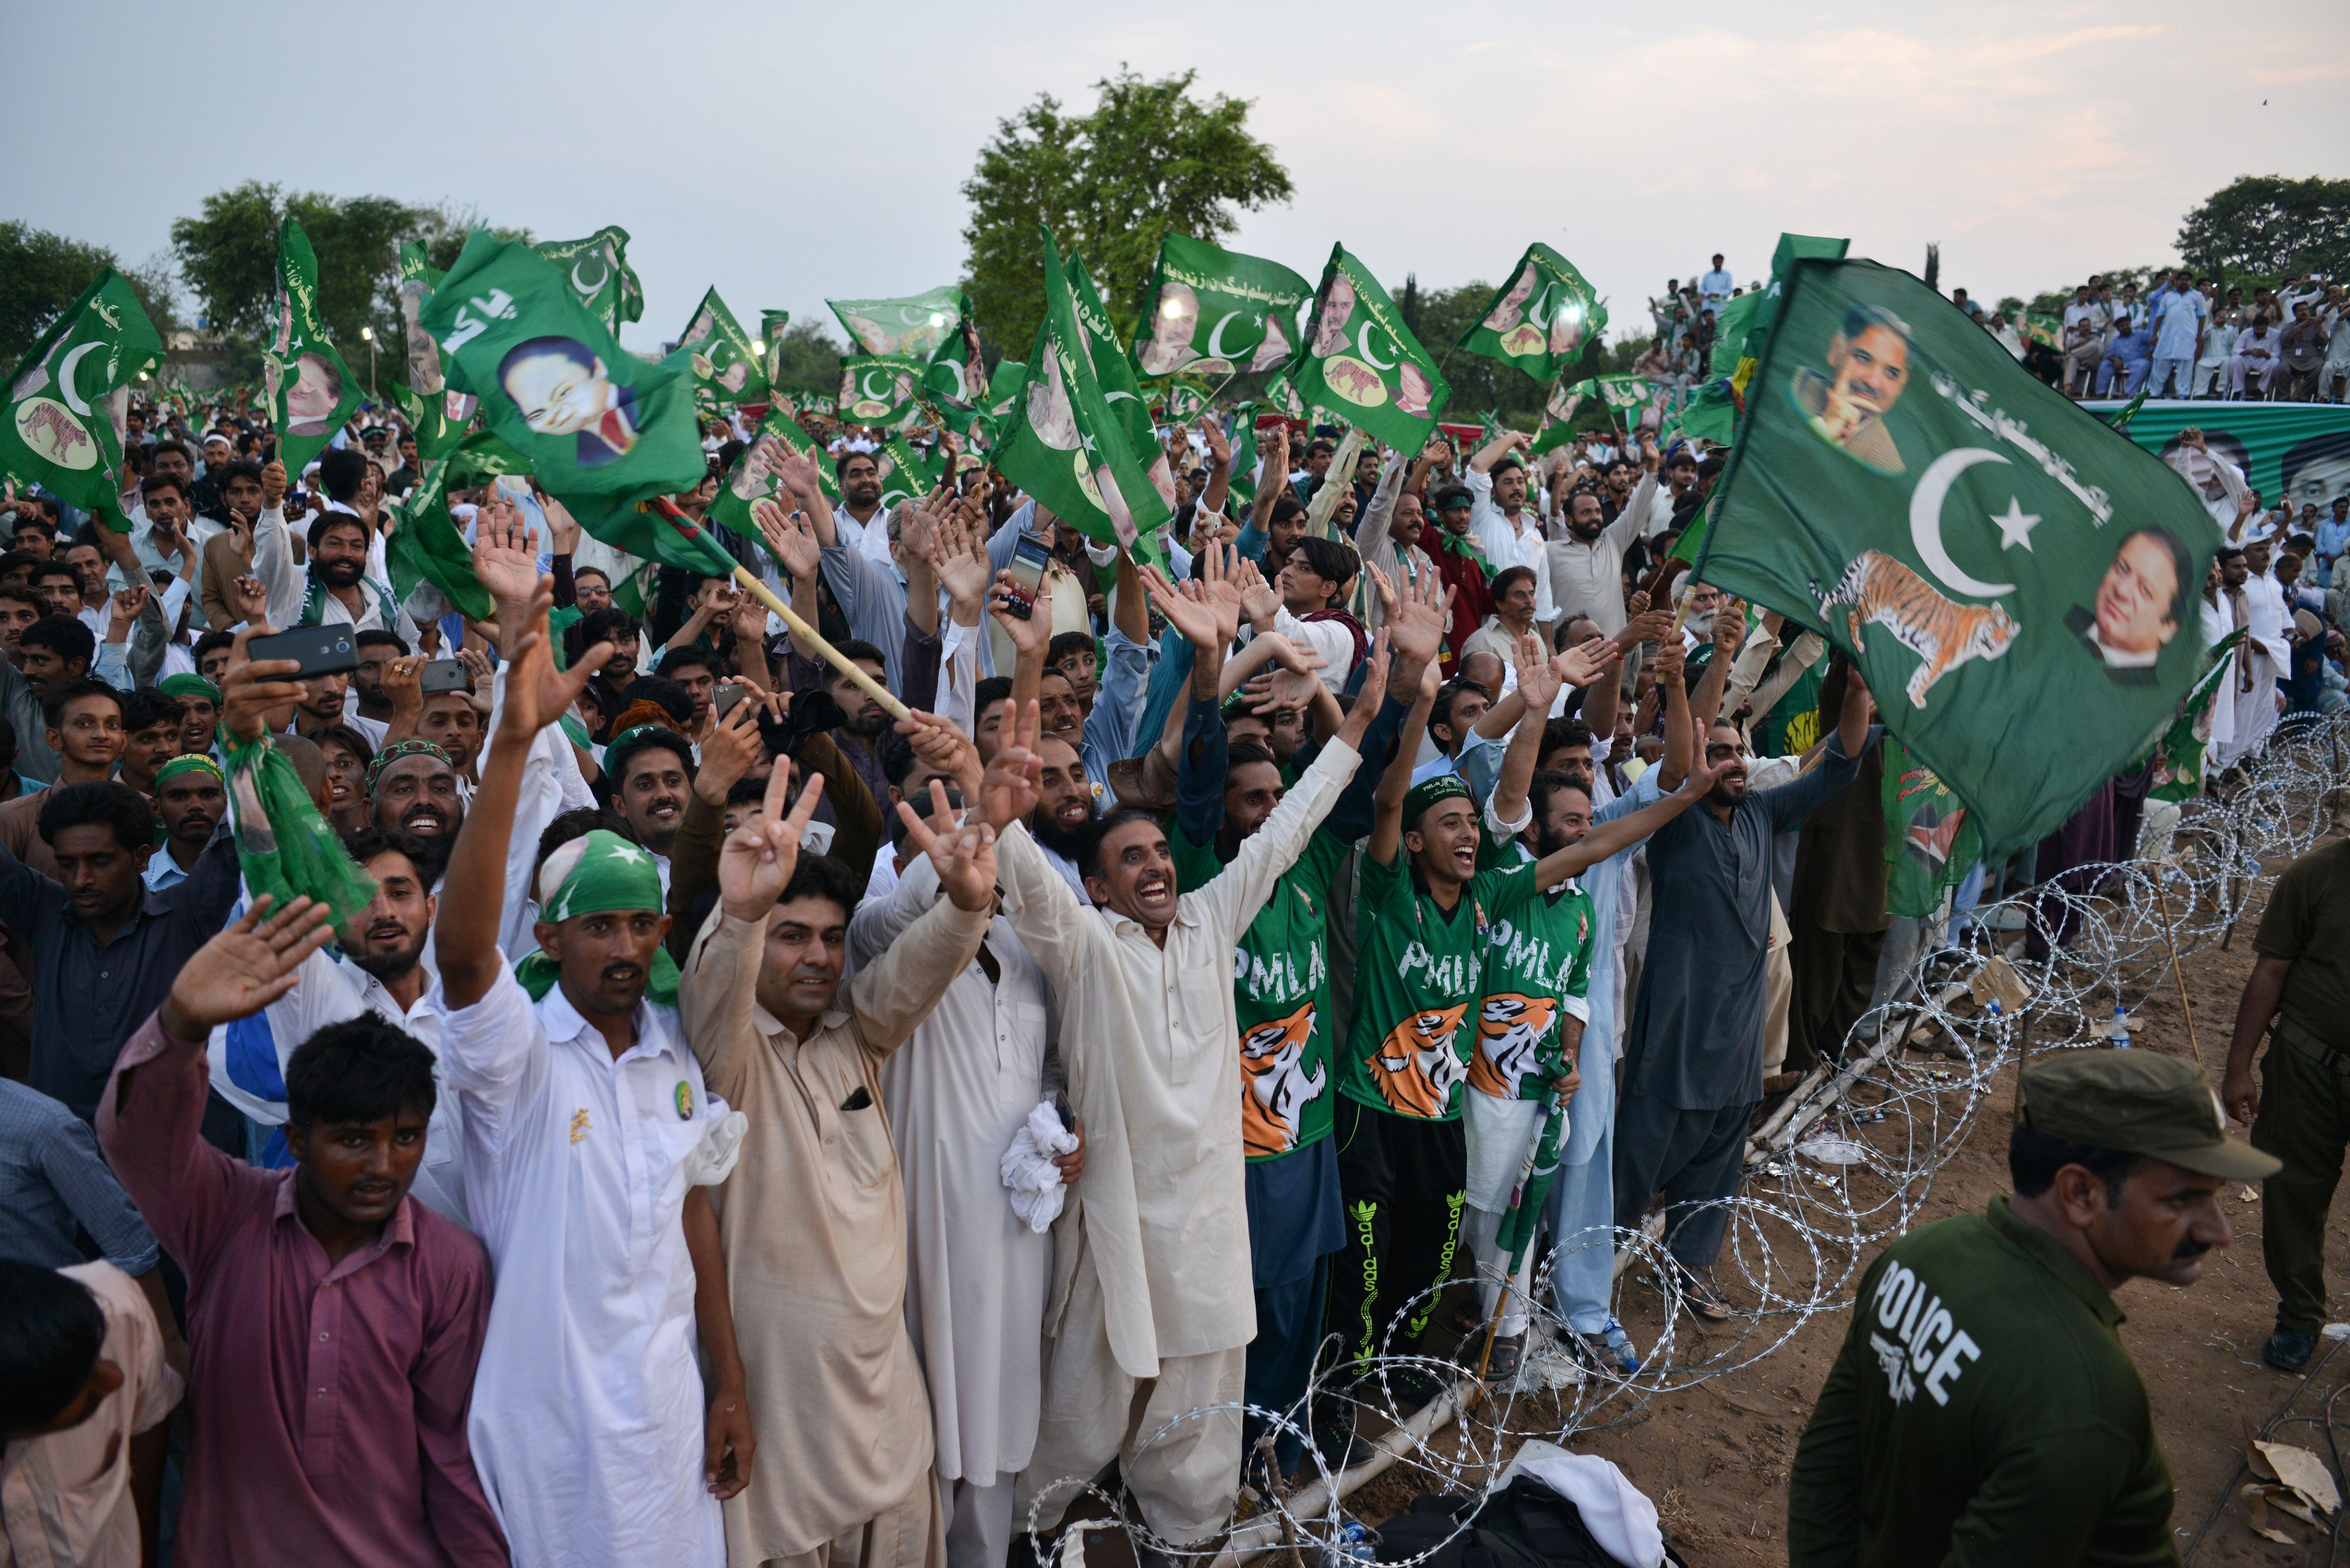 Supporters of Shabaz Sharif, the brother of ousted Pakistani Prime Minister Nawaz Sharif and the head of Pakistan Muslim League-Nawaz attend his campaign rally in Pindi Gheb, in the district of Attock, in the Punjab province, on July 19, 2018. (Aamir Quresh—AFP/Getty Images)